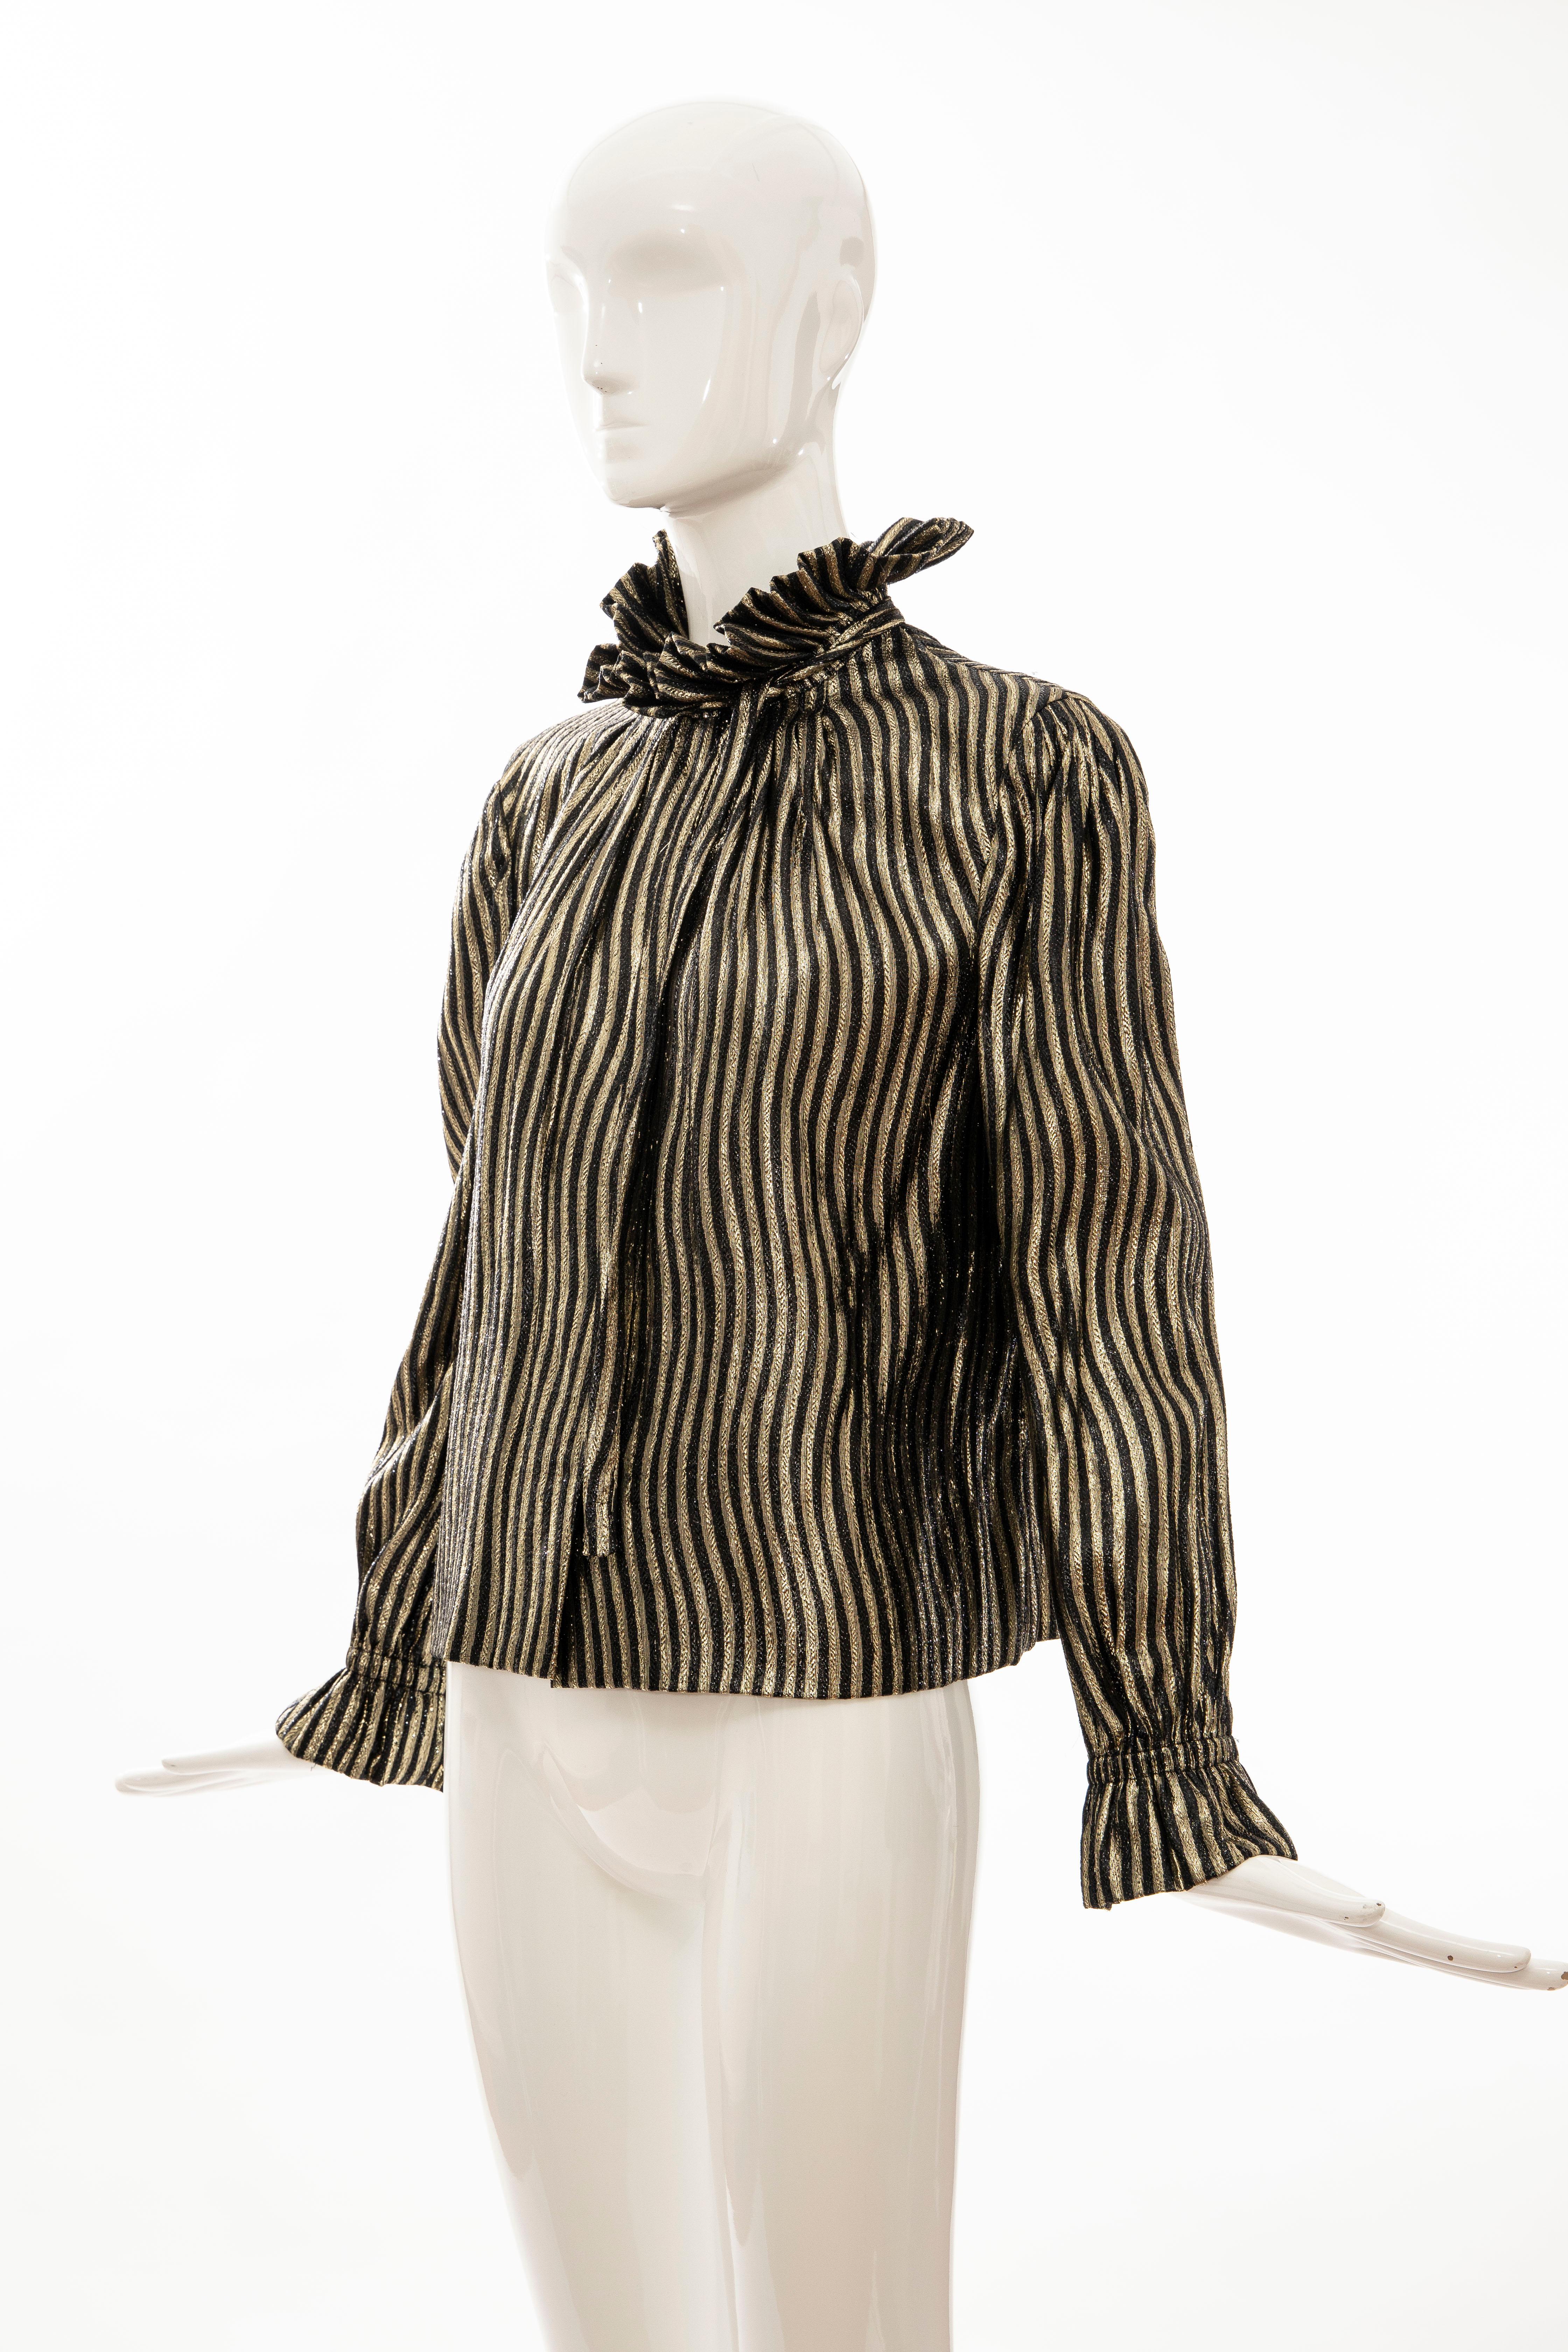 Pauline Trigere Black Gold Striped Metallic Snap Front Blouse, Circa: 1970's For Sale 8